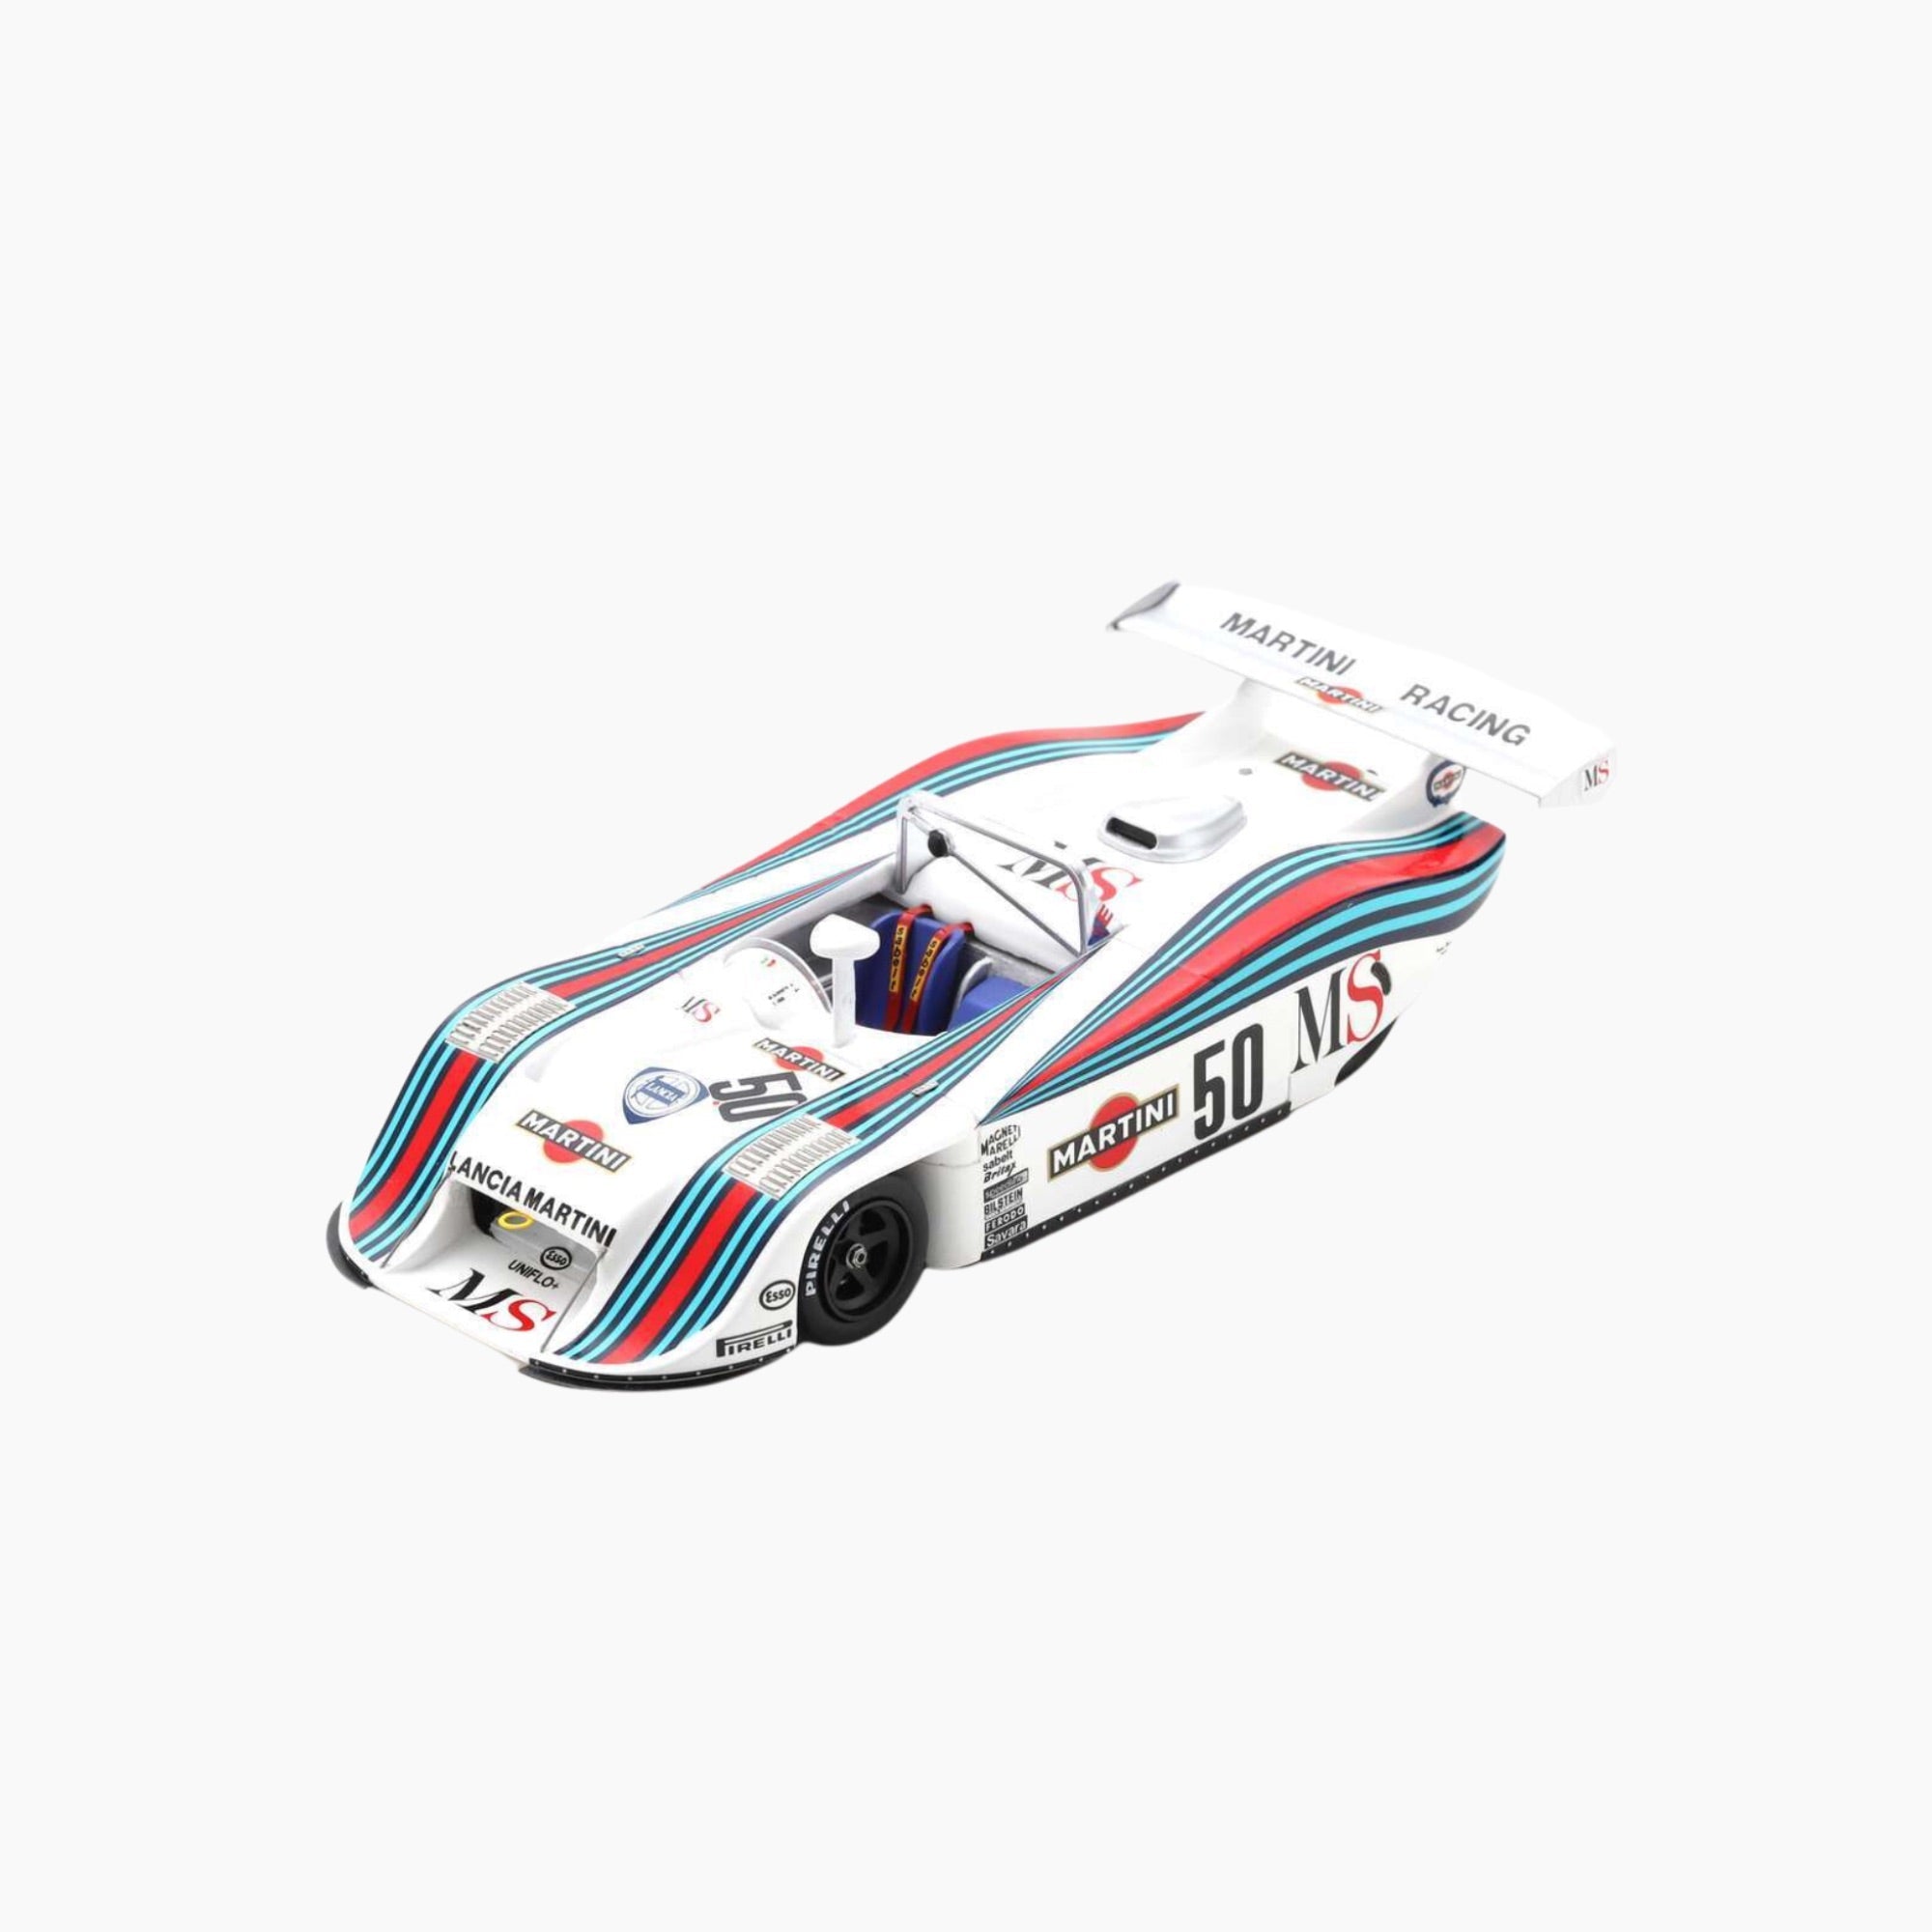 Lancia LC1 Winner 1000km Nurburgring 1982 | 1:43 Scale Model-1:43 Scale Model-Spark Models-gpx-store